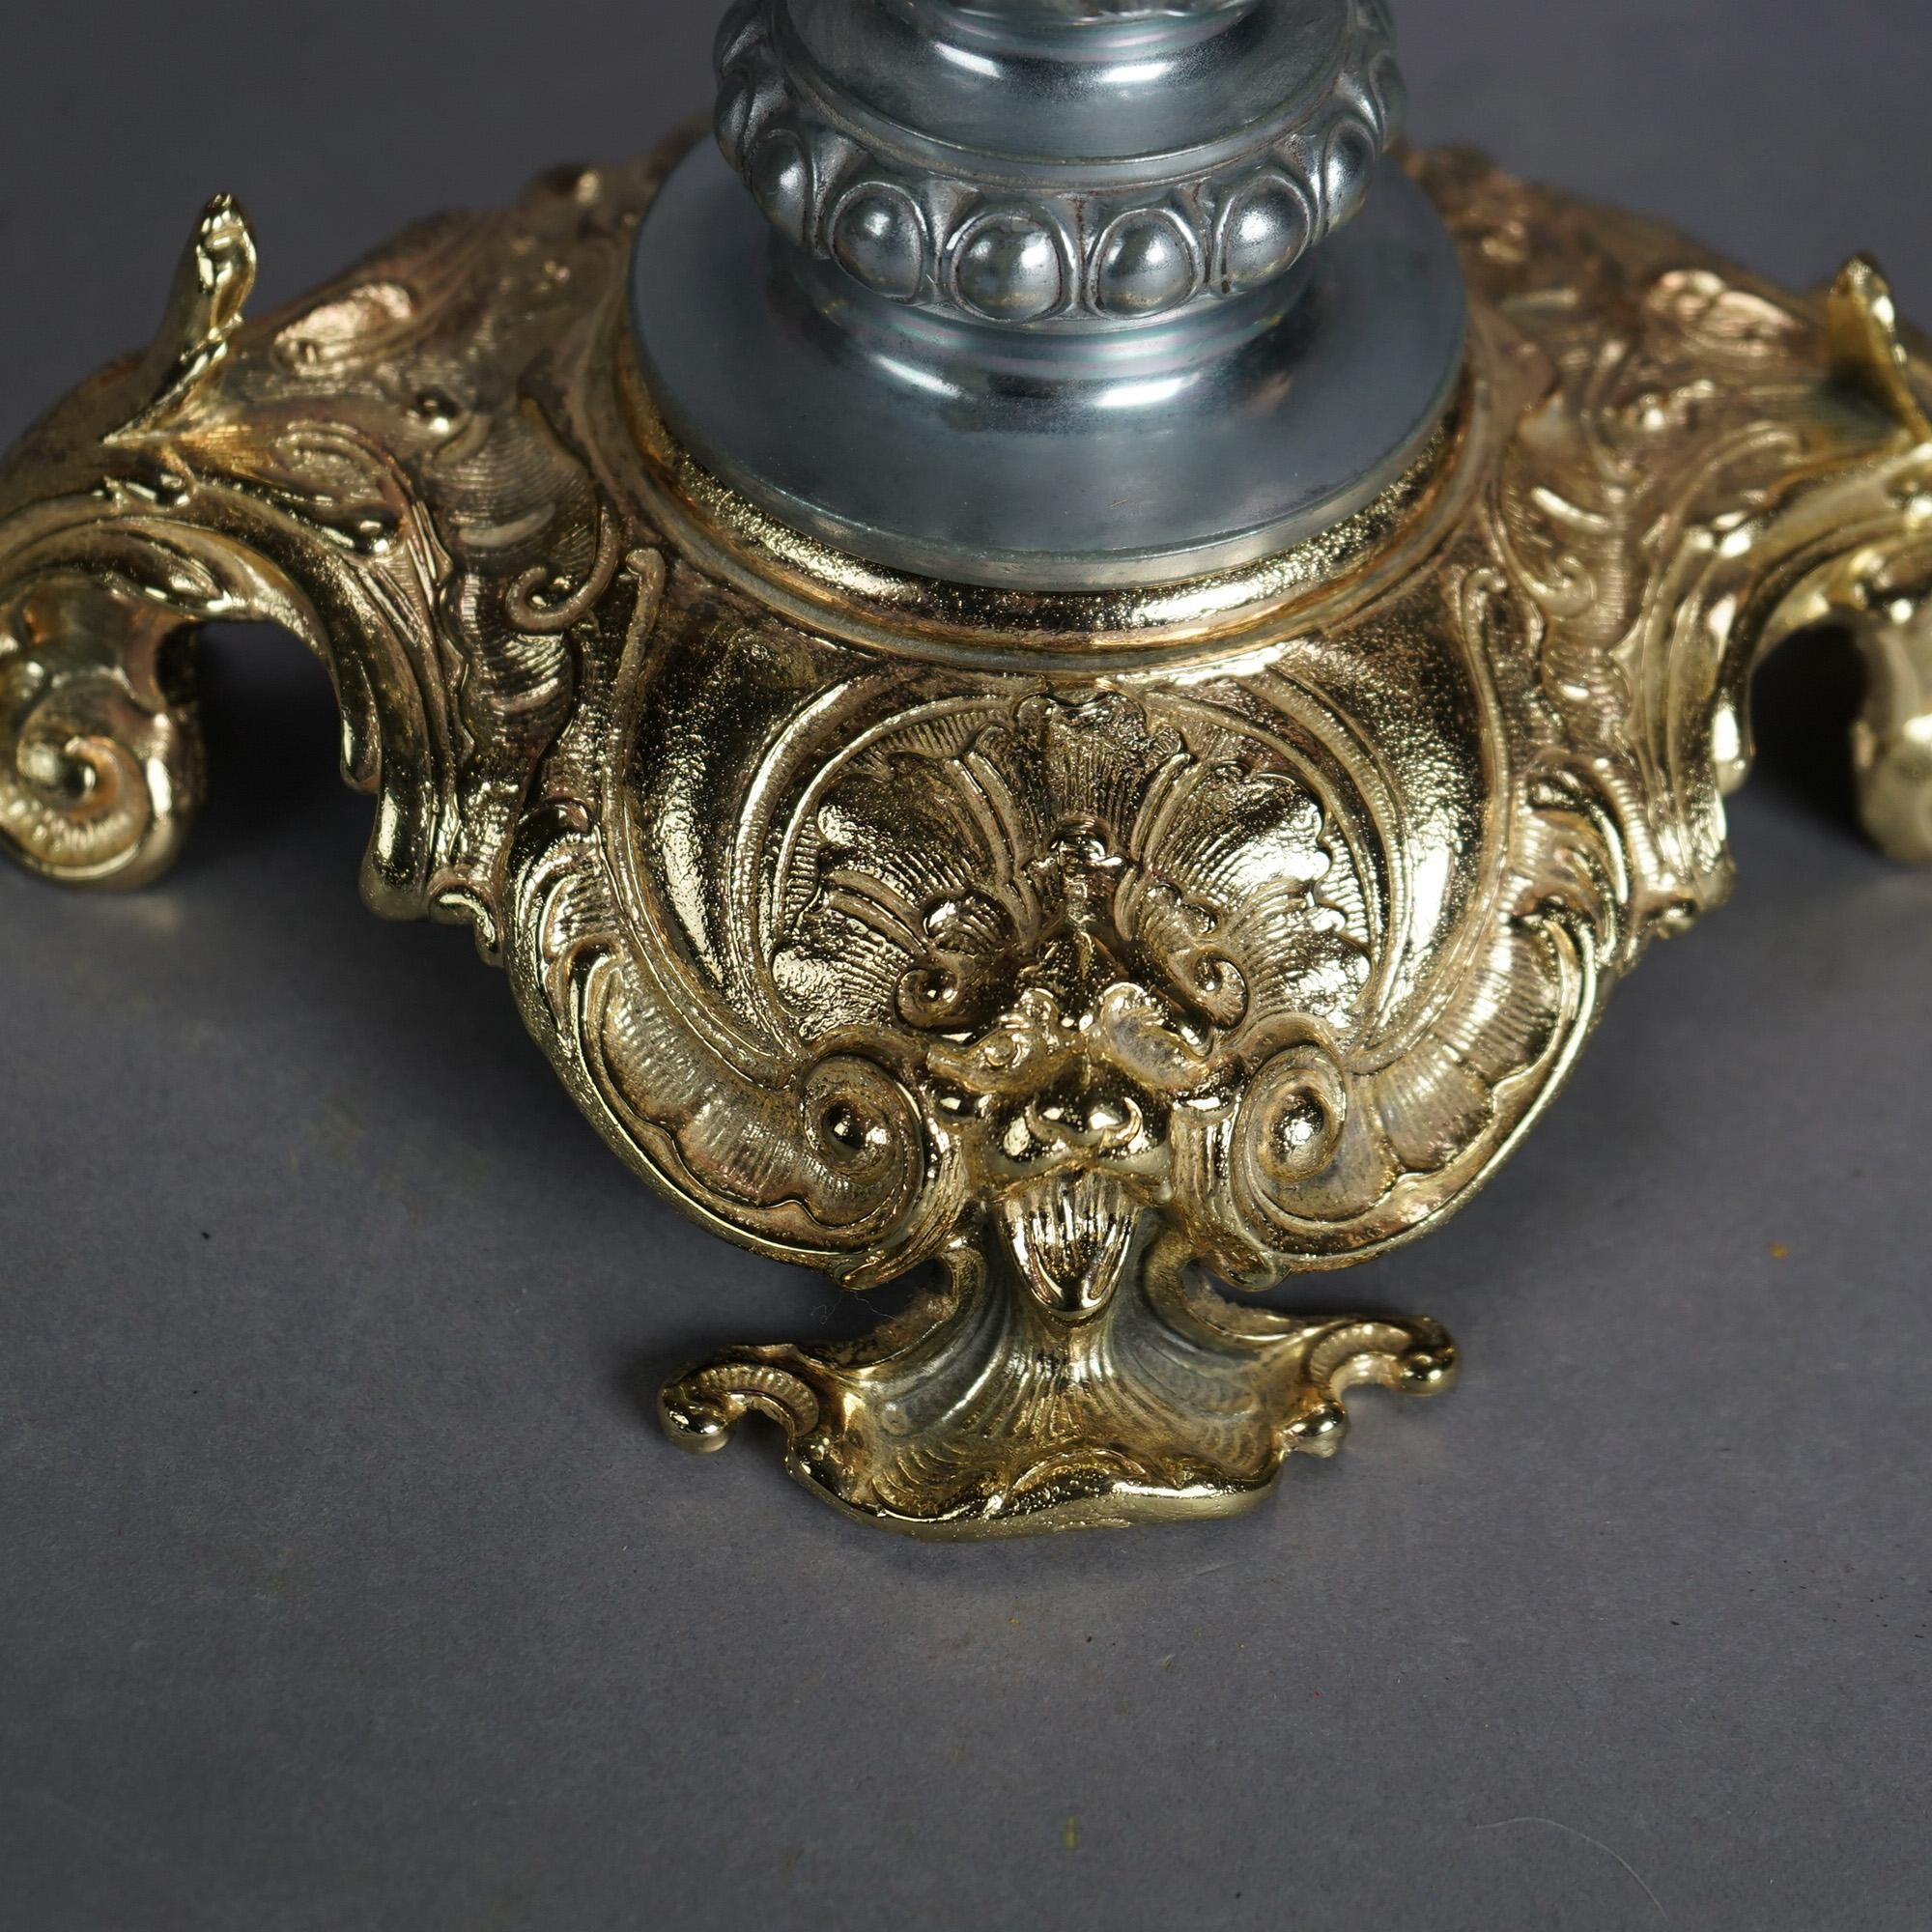 Antique Gilt Metal & Onyx Victorian Parlor Lamp & Hand Painted Shade, c1890 For Sale 2